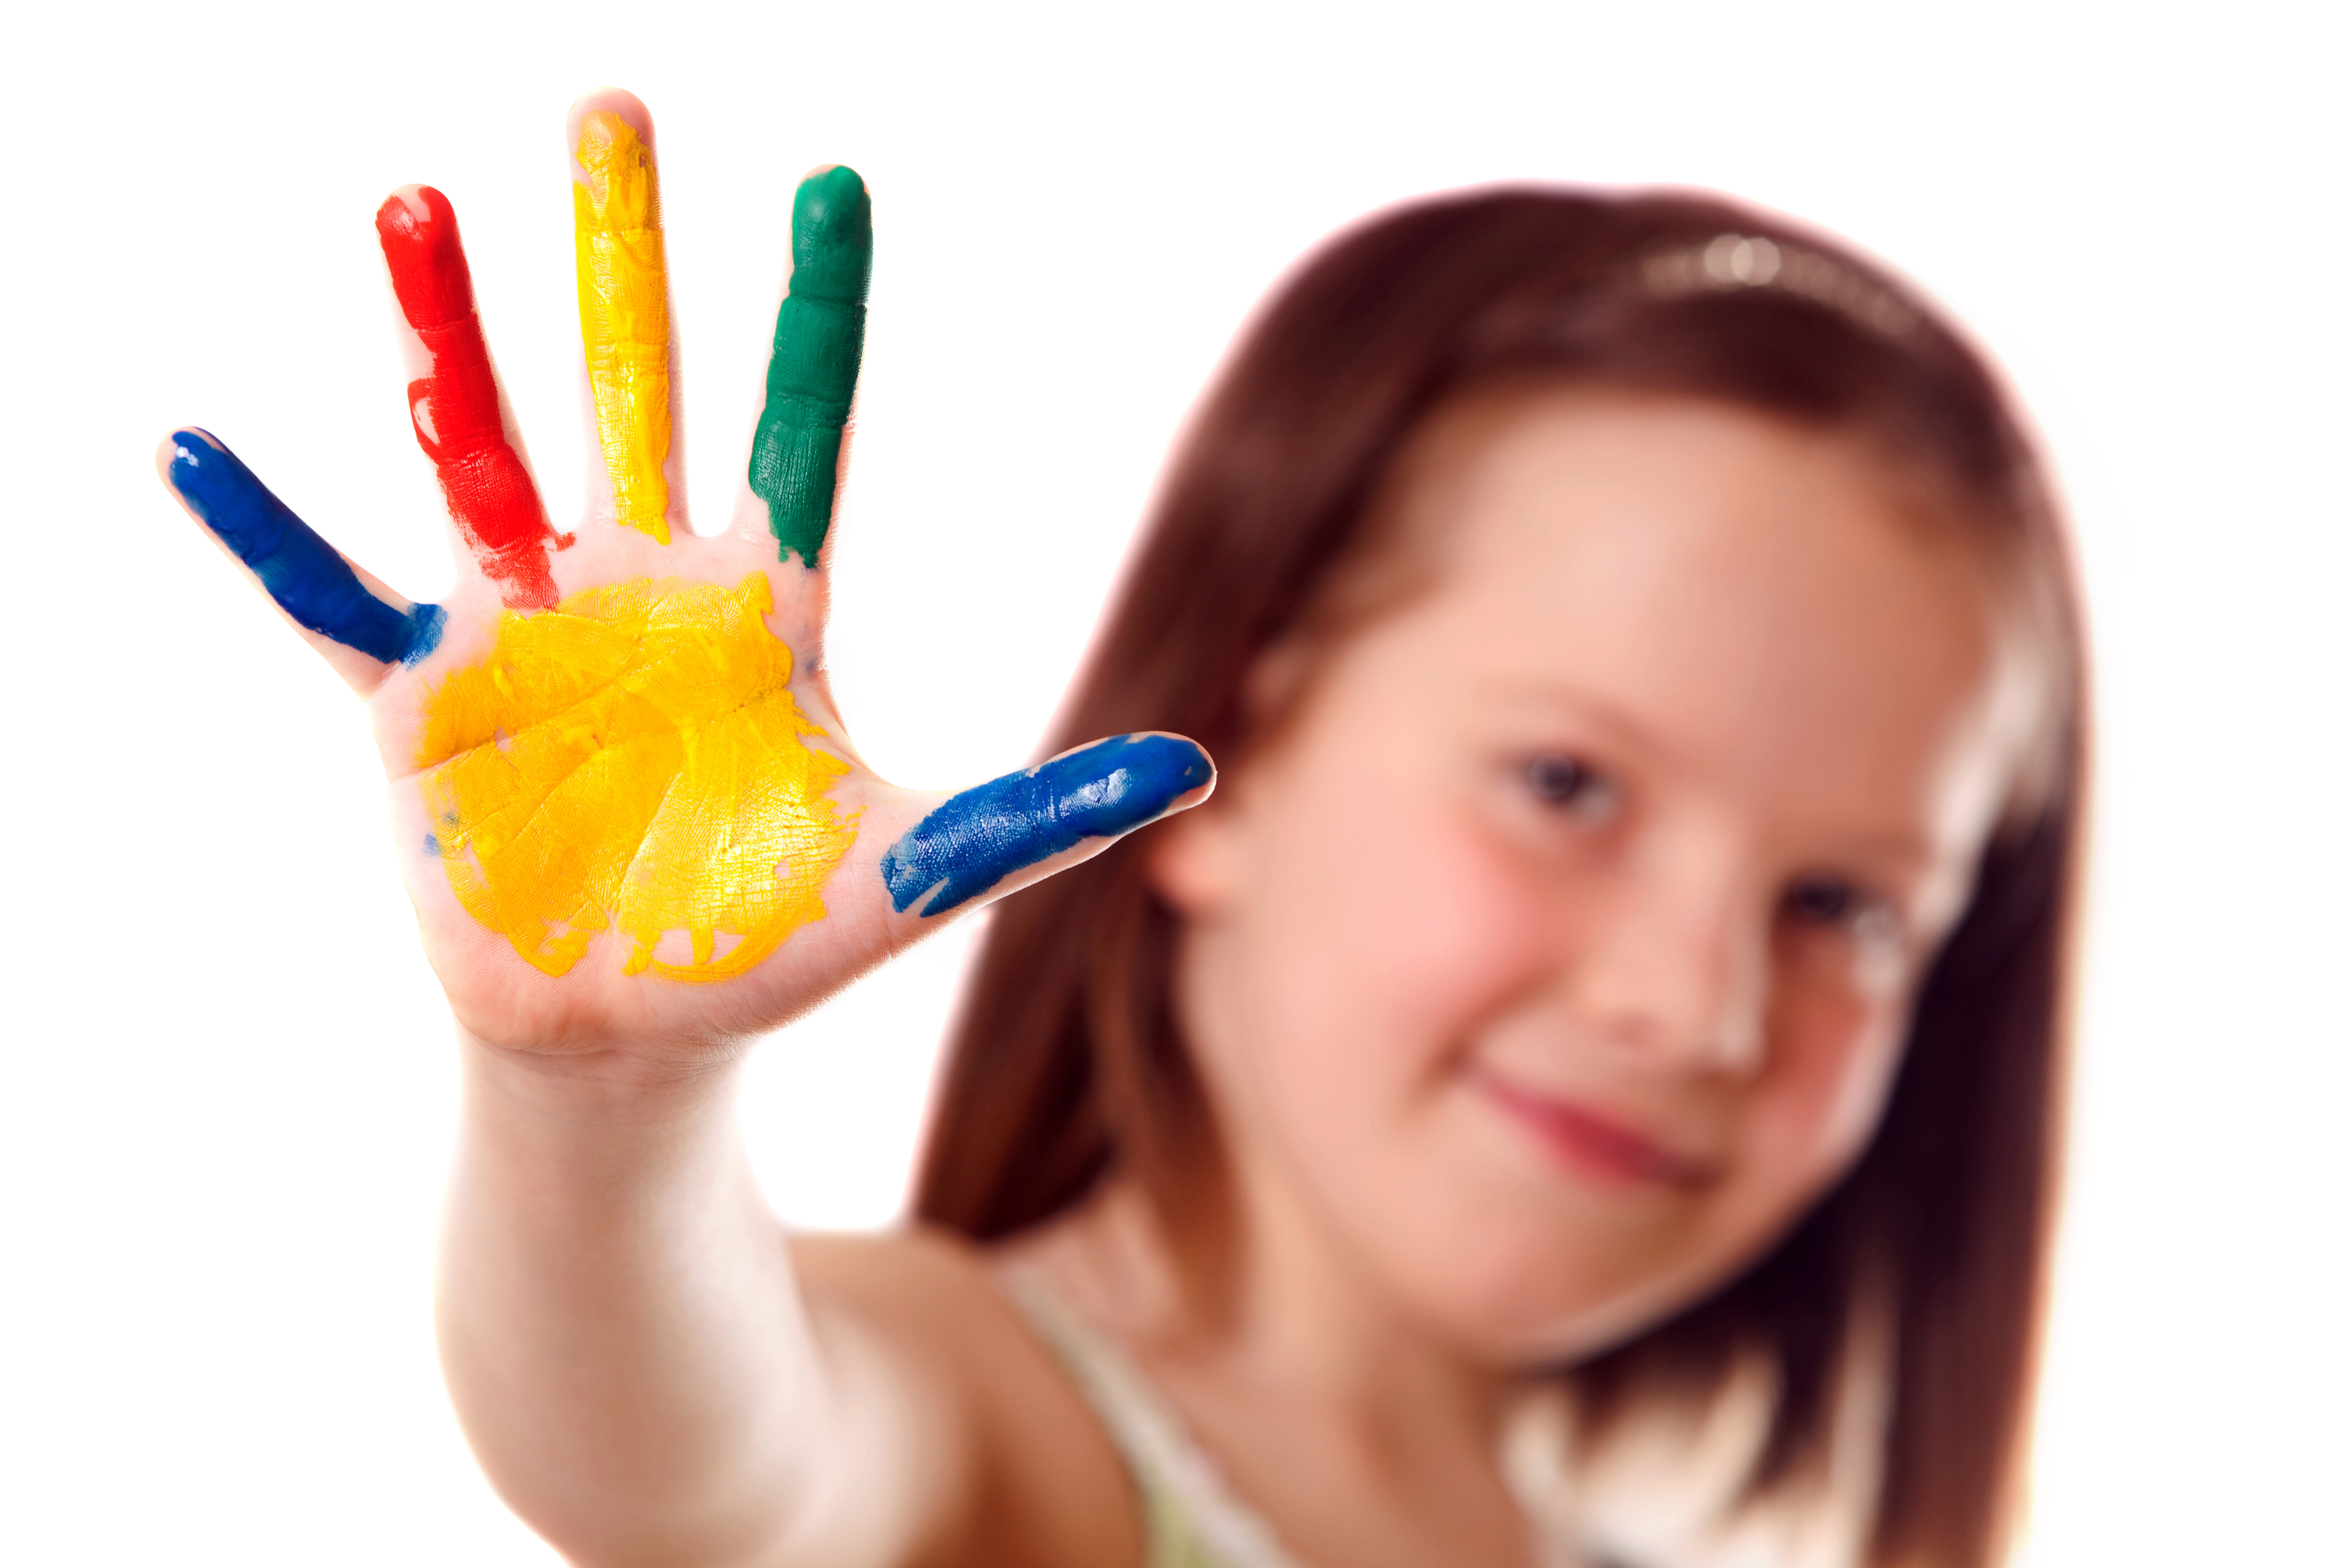 Child with fingers painted